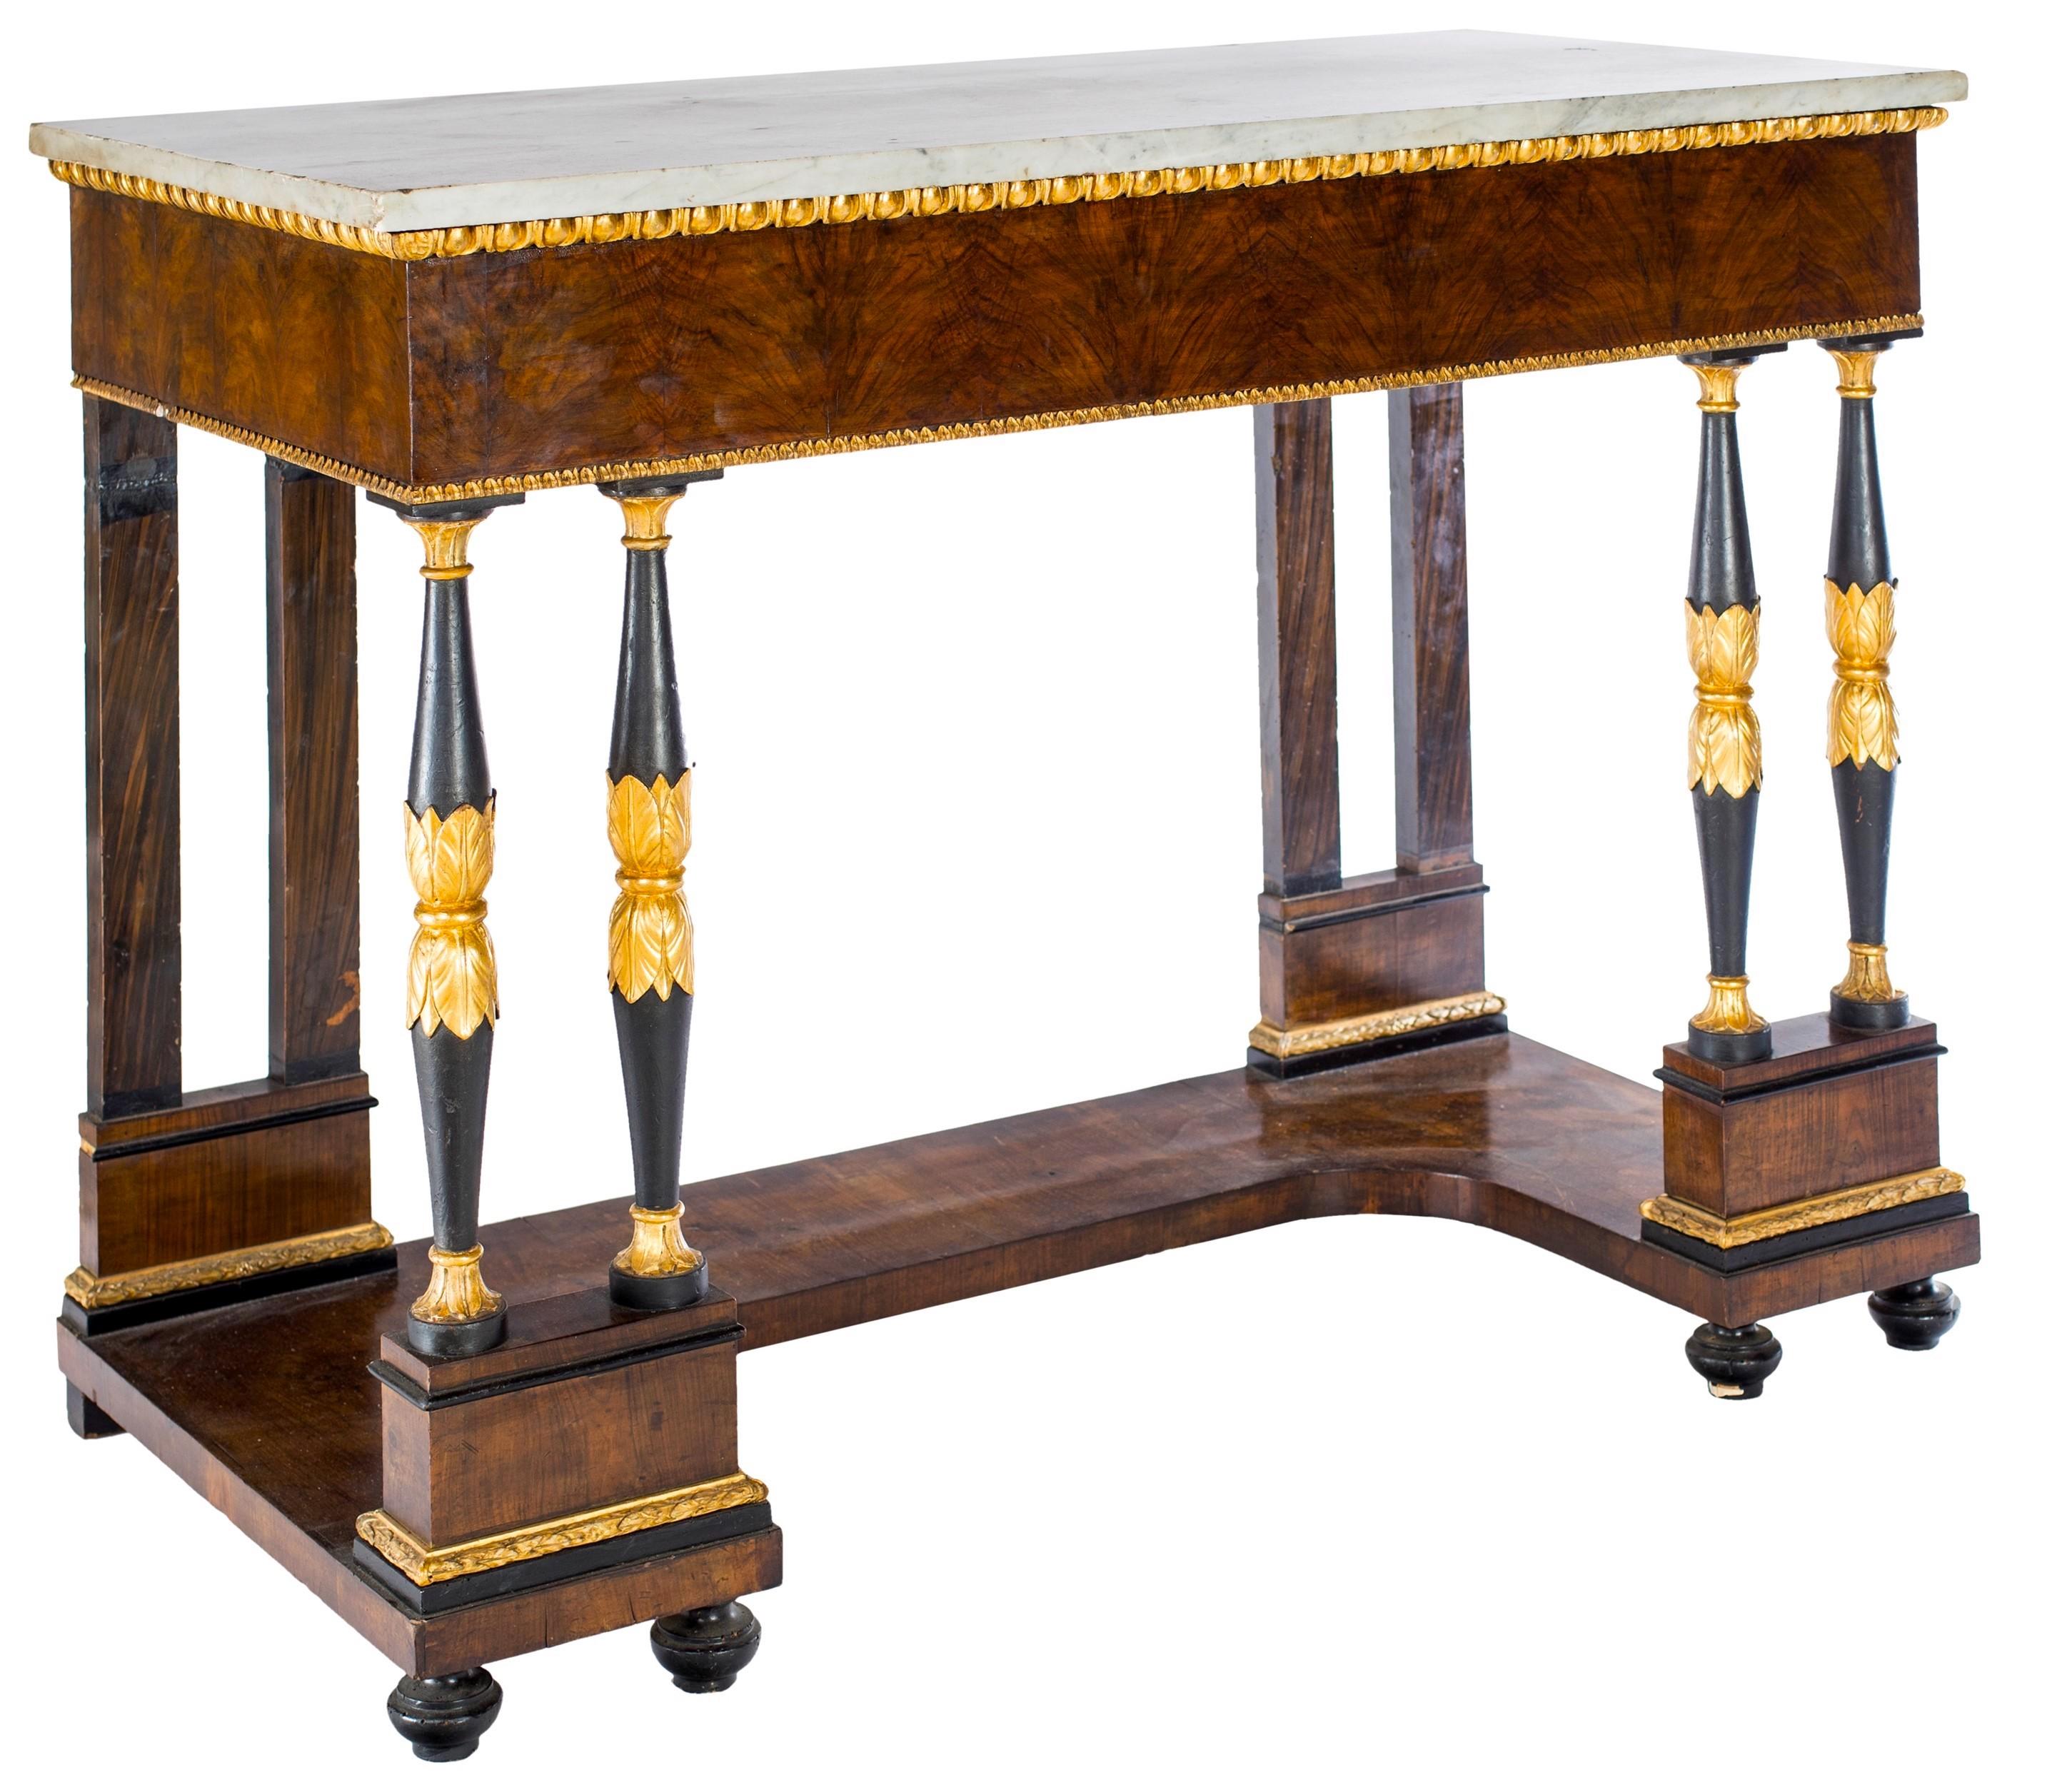 Elegant Italian Empire Consoles Tables with White Marble Top, 1815 For Sale 5